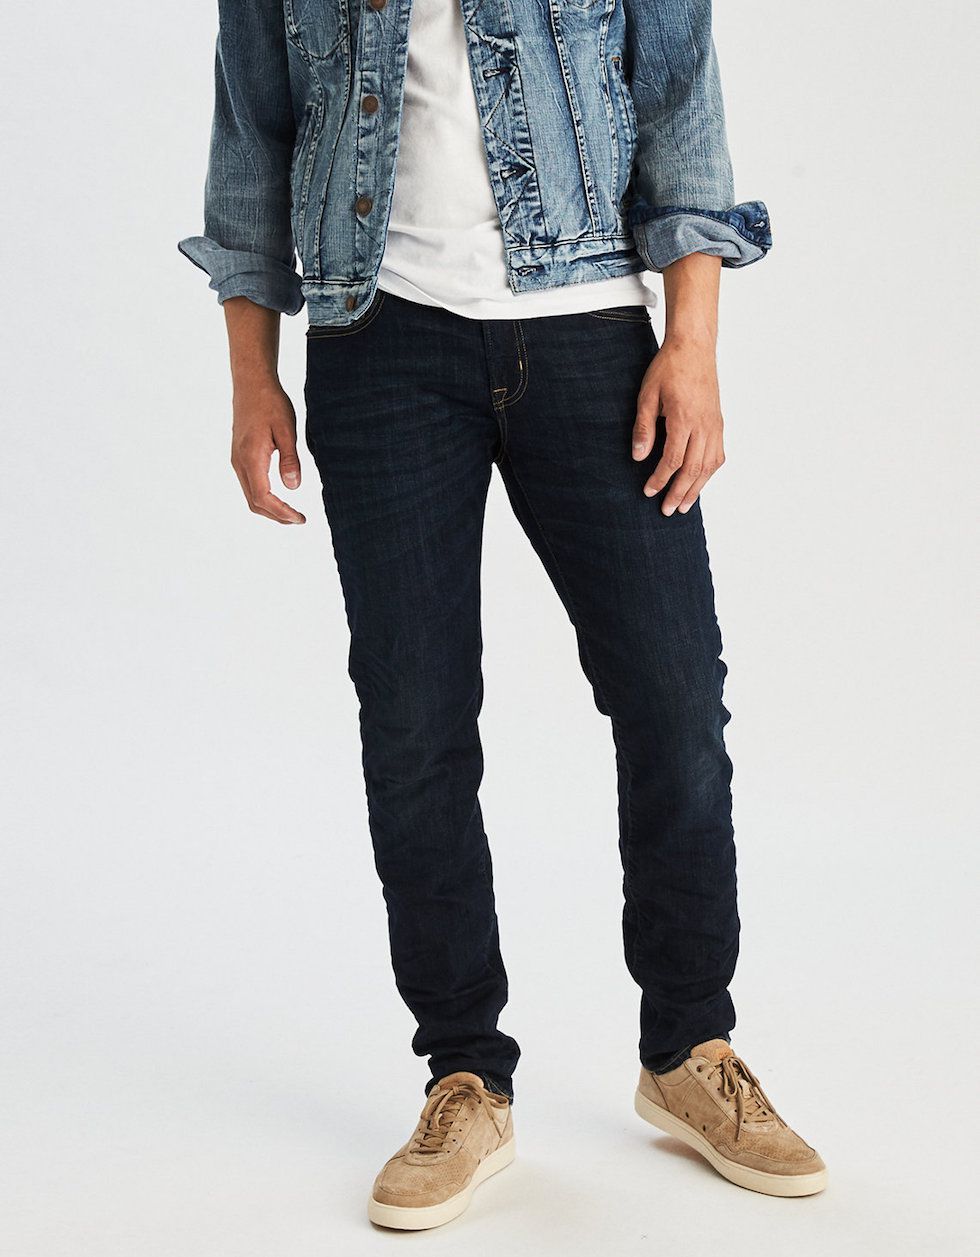 This American Eagle Jeans Sale Means for